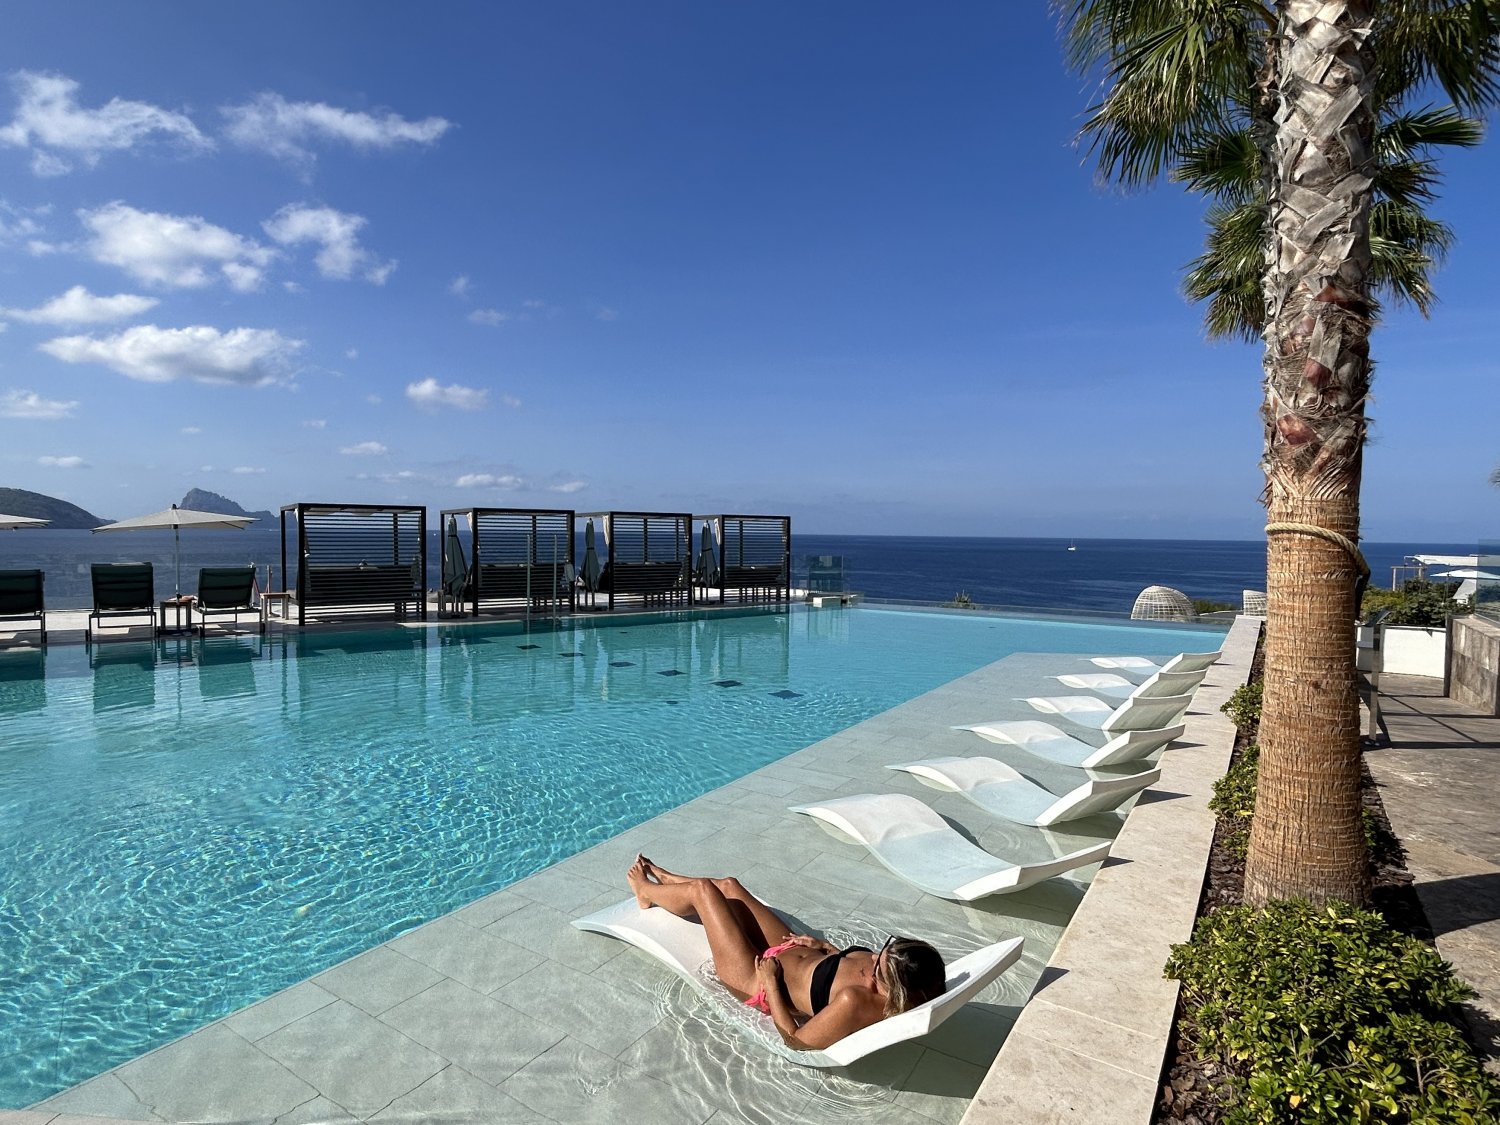 Chilling by the pool: 7Pines Resort Ibiza